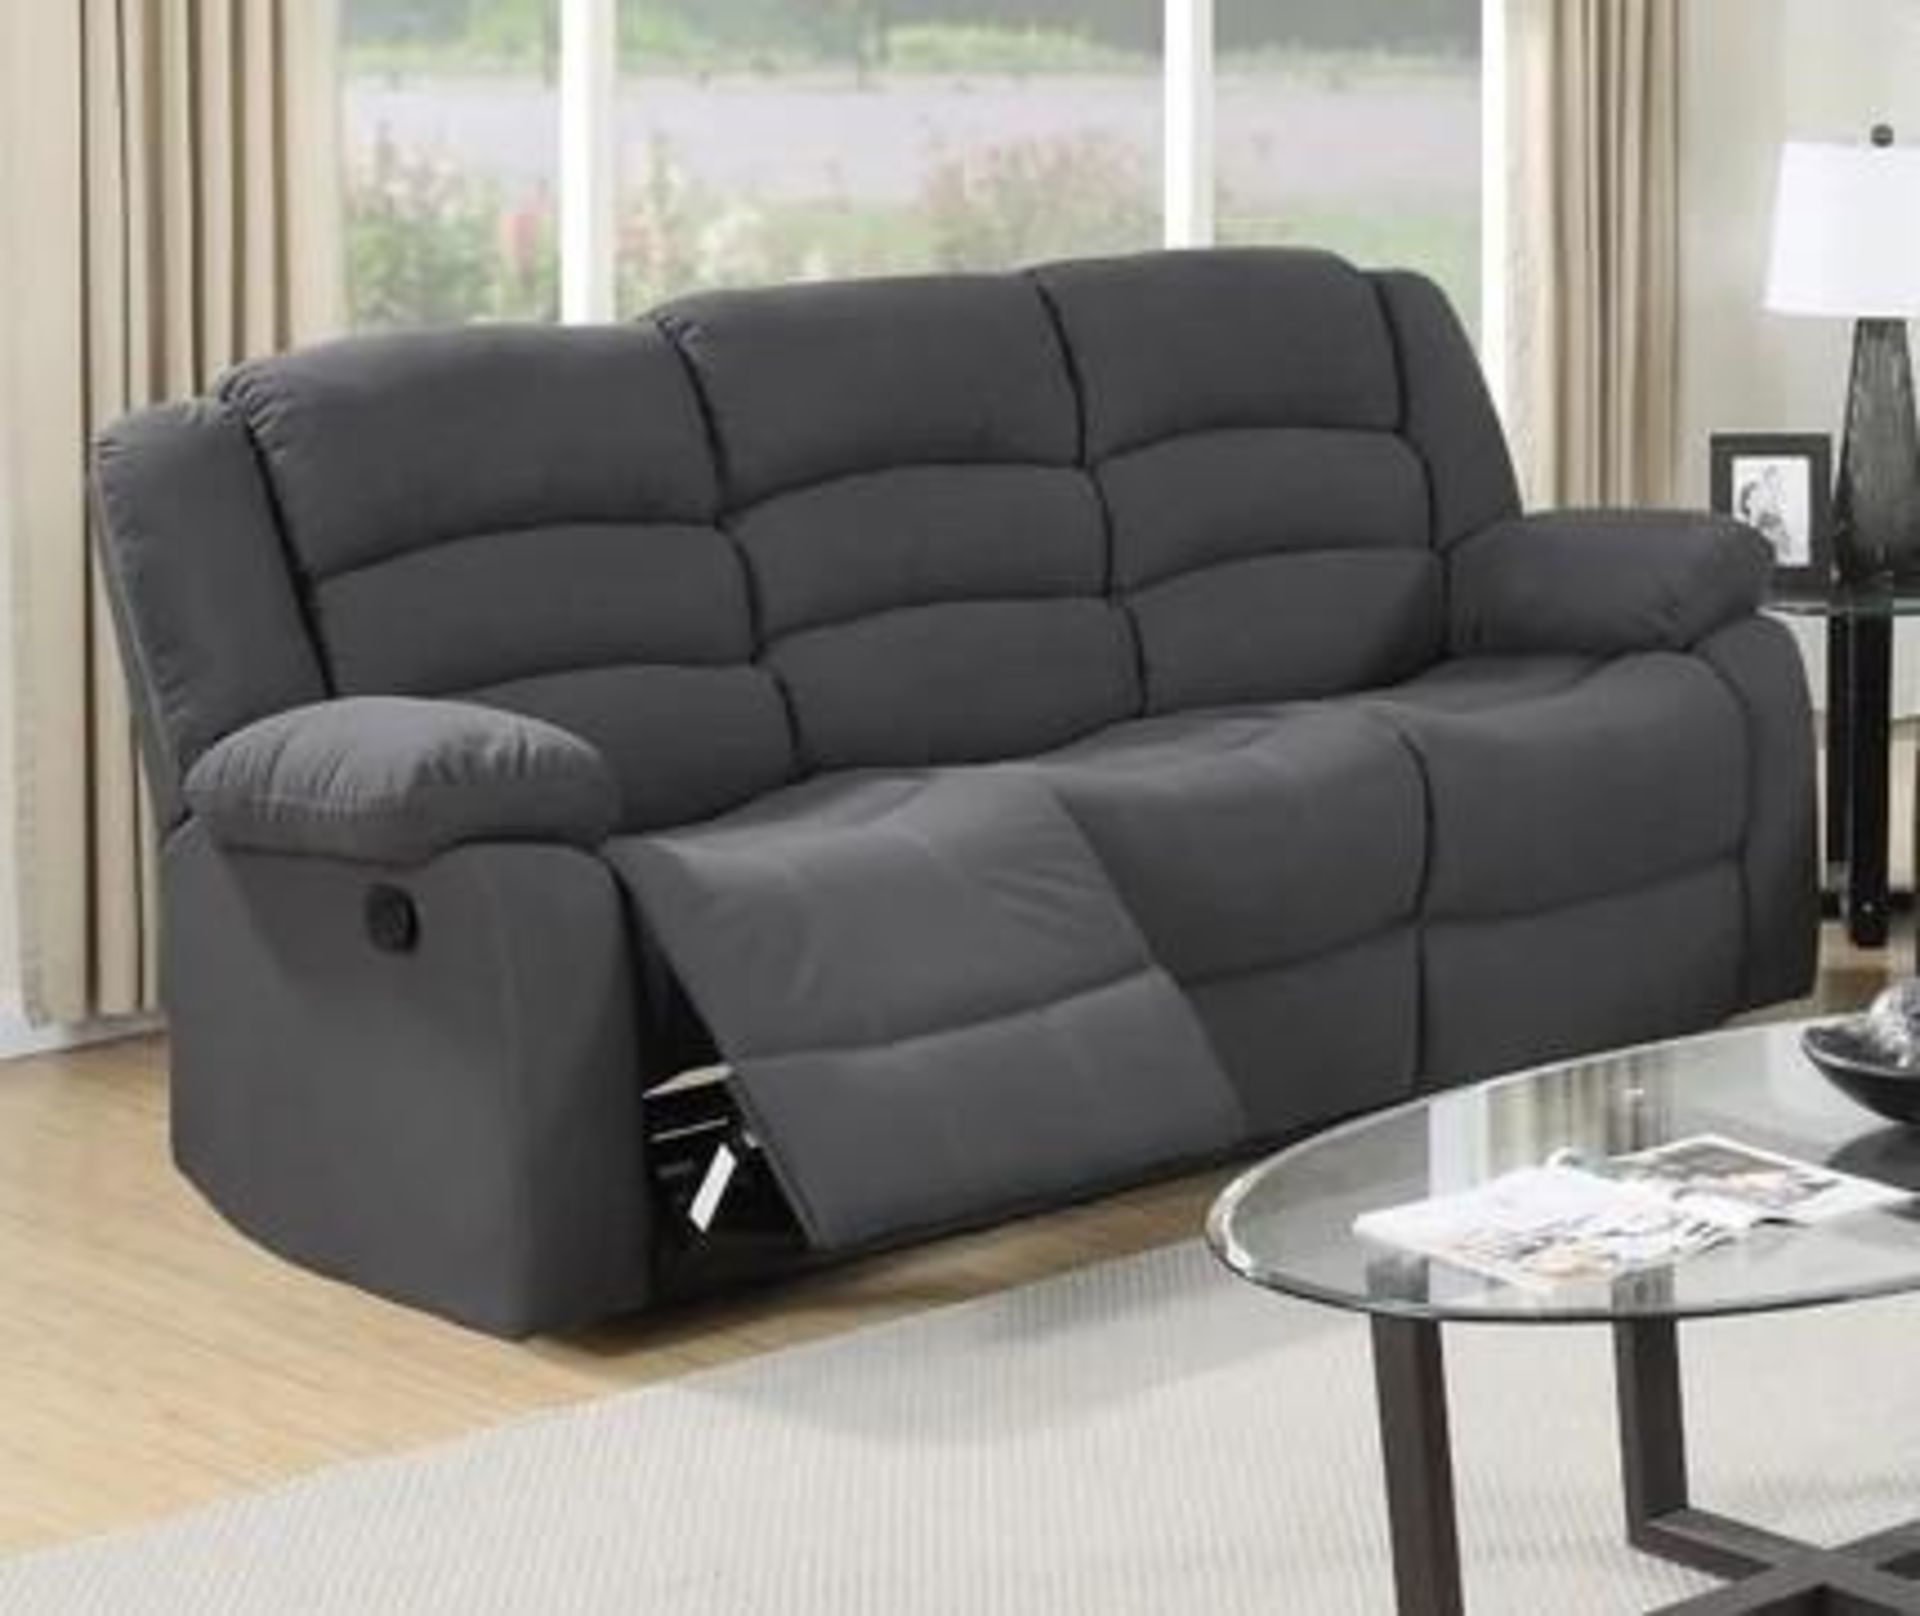 BRAND NEW fabric Malaga 3 + 2 seater manual recliner sofa in chenille grey. - Image 2 of 4